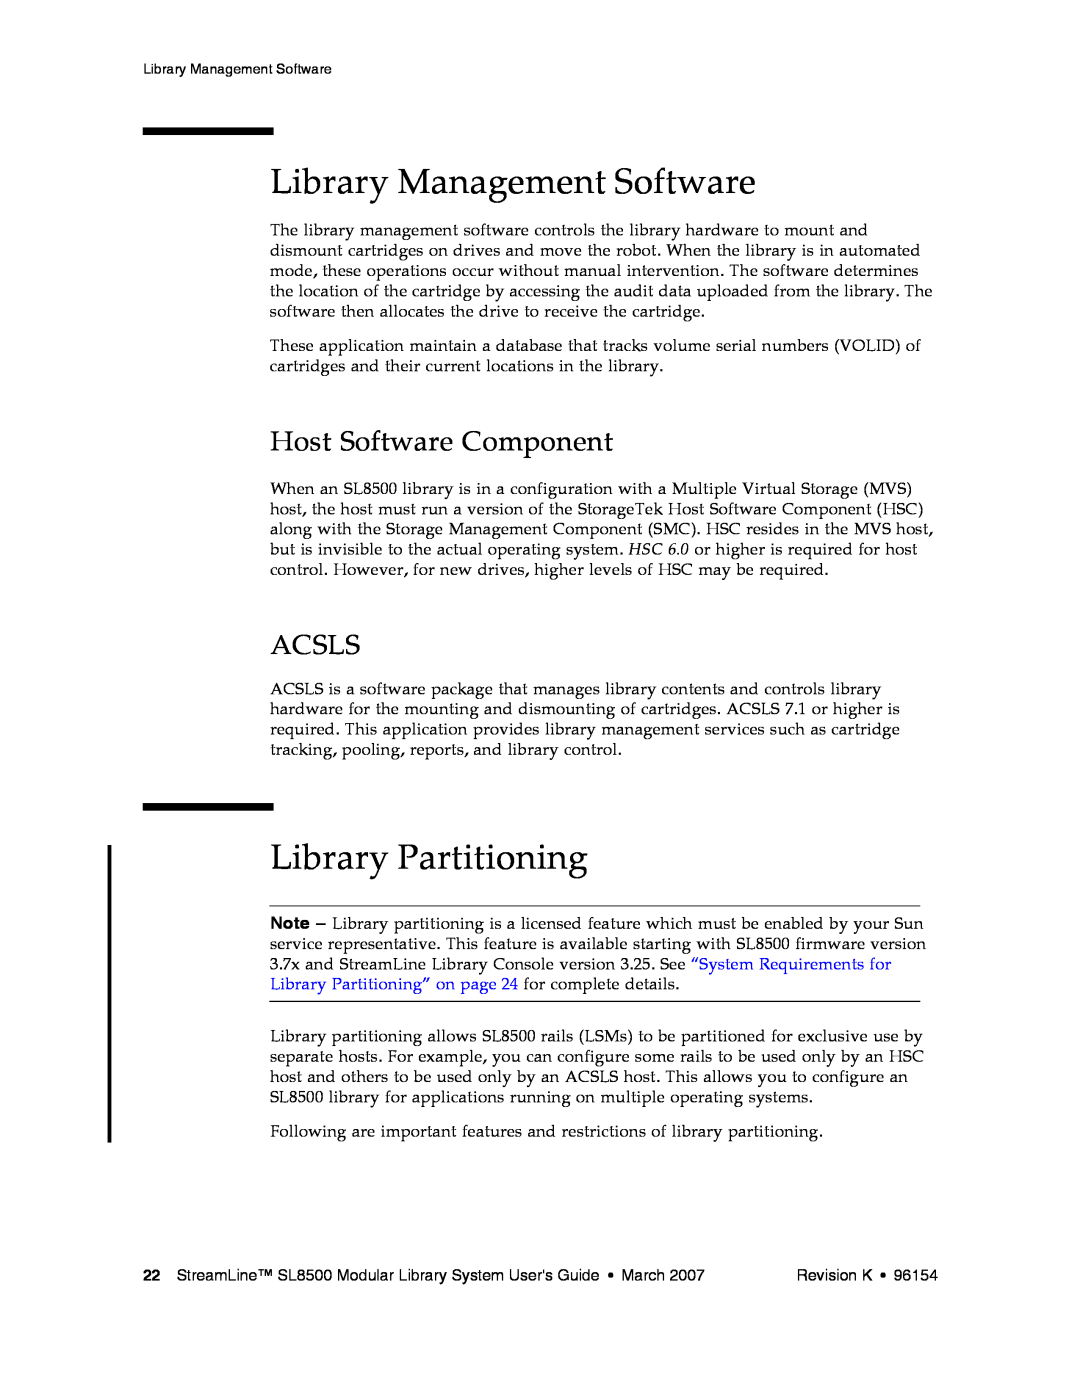 Sun Microsystems SL8500 manual Library Management Software, Library Partitioning, Host Software Component, Acsls 